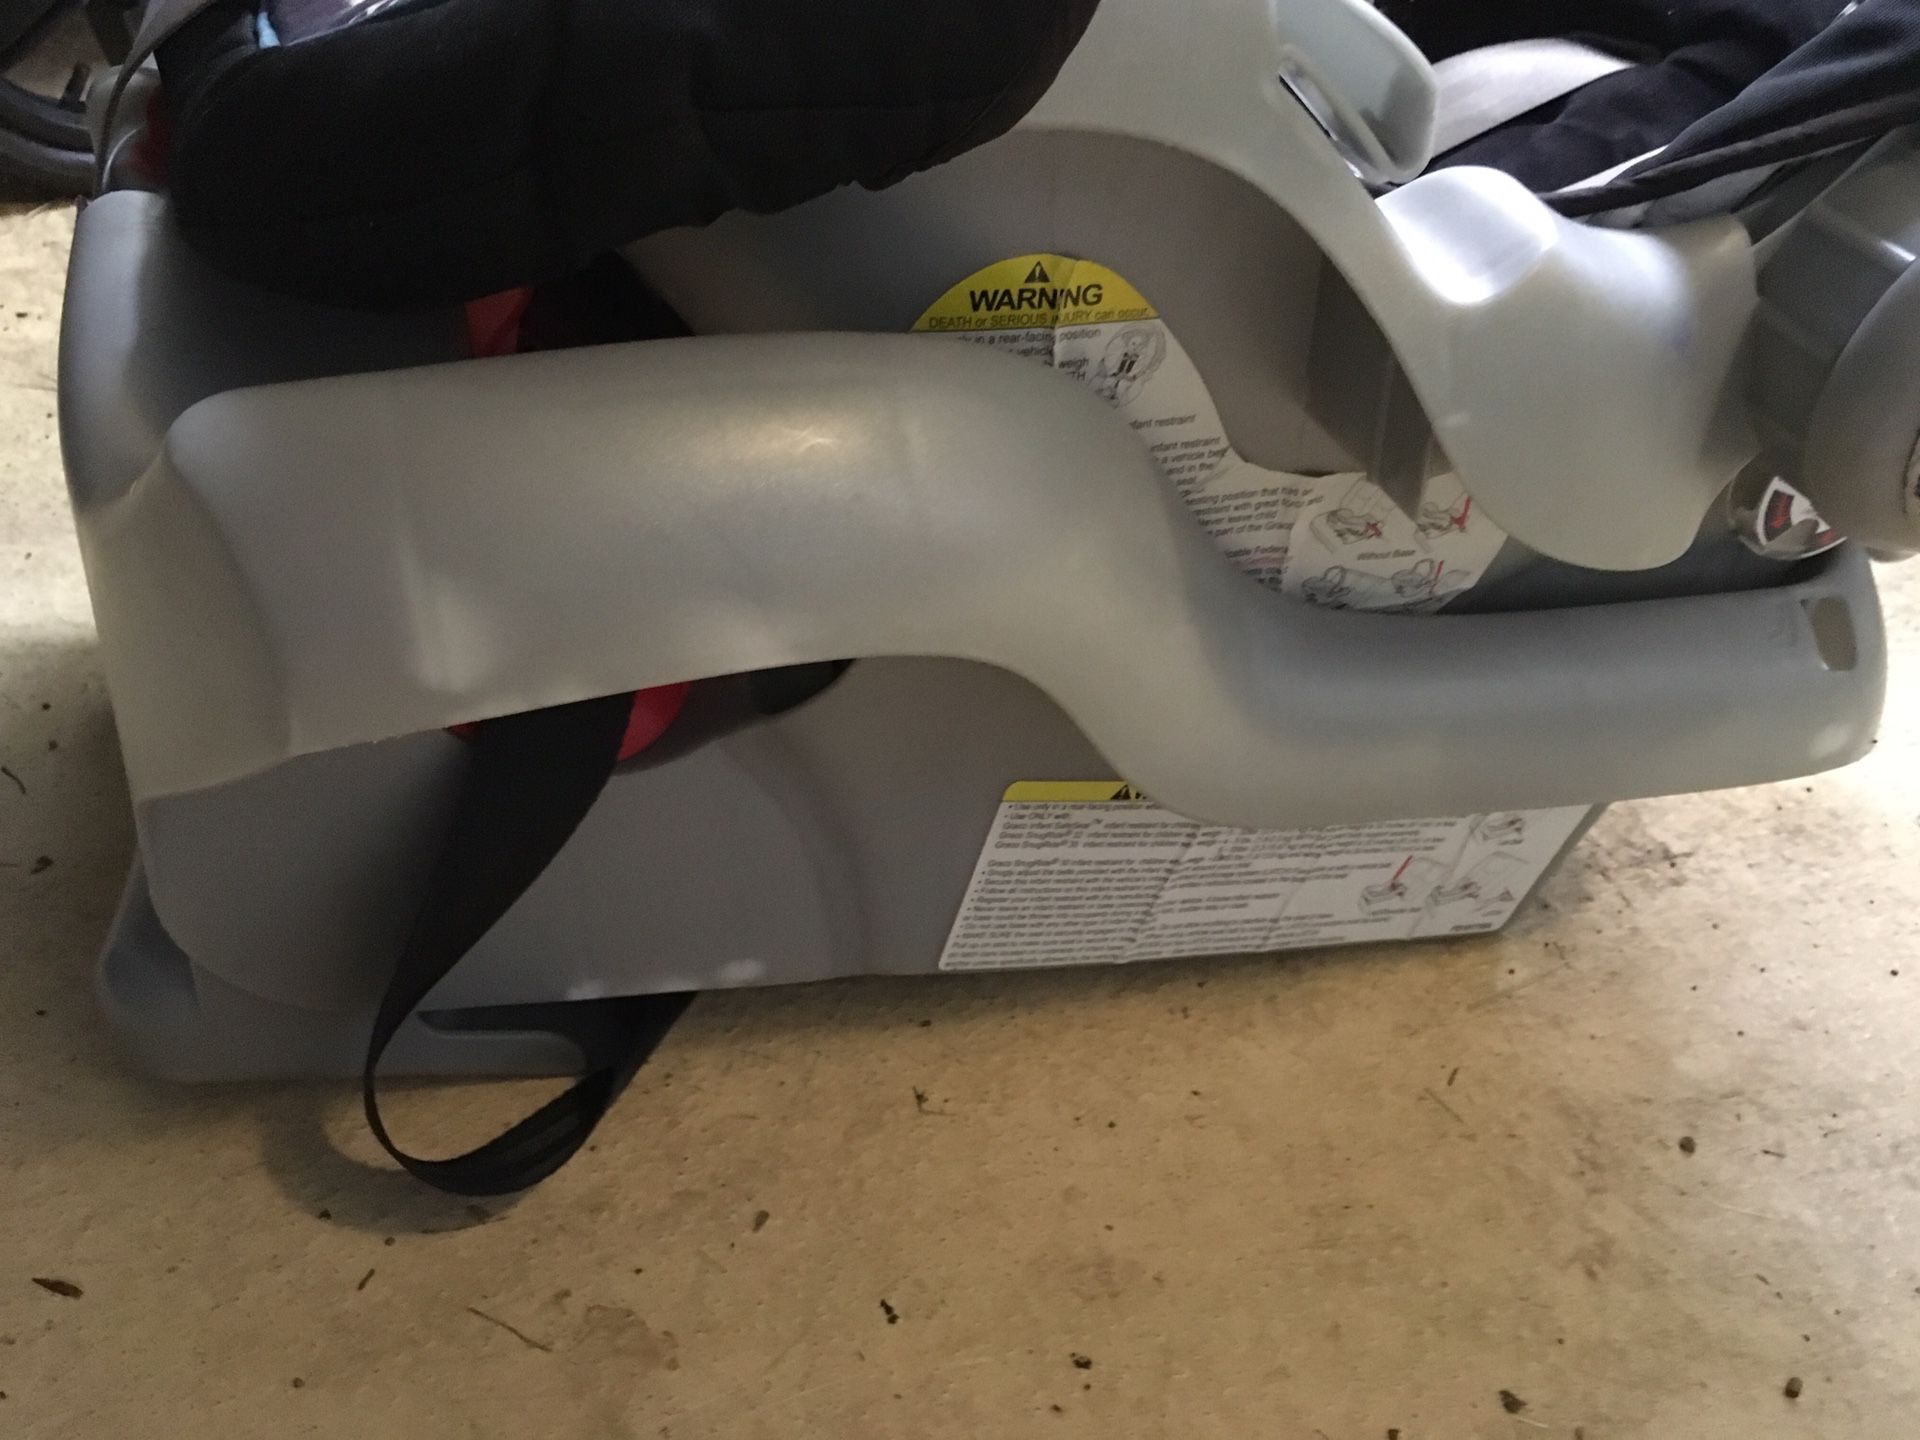 Graco Snugride car seat with two bases